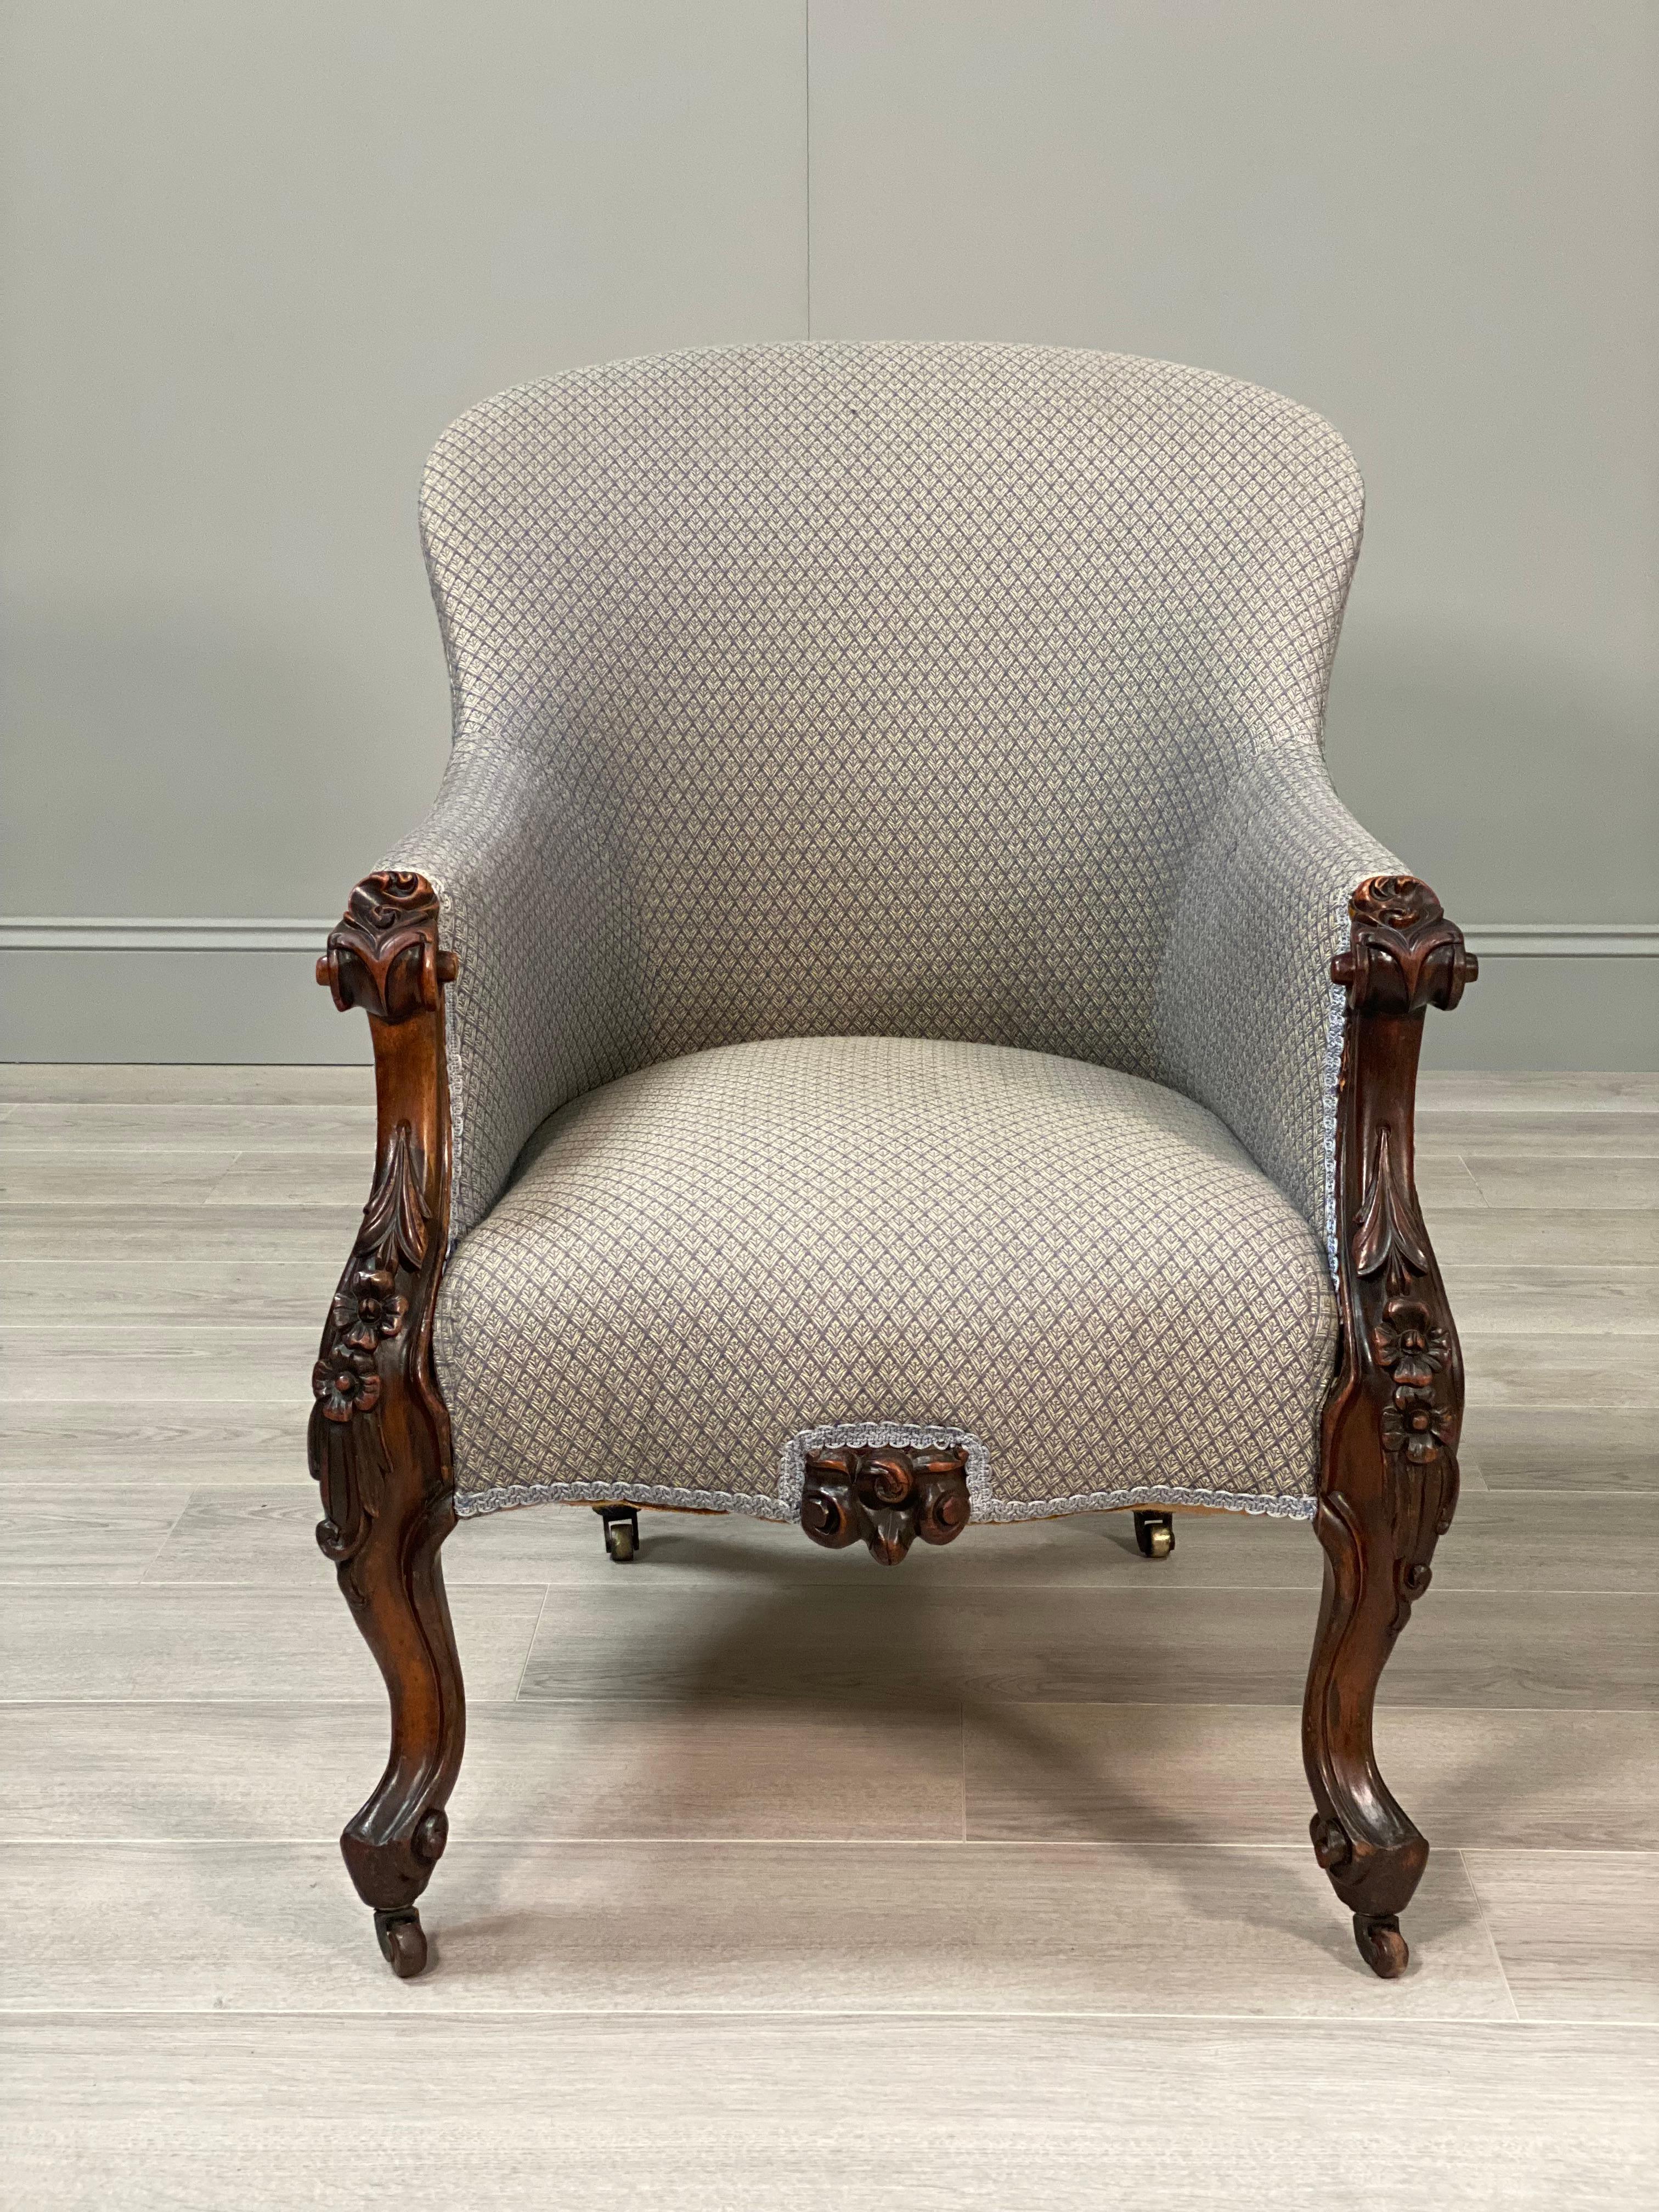 Carved Rosewood armchair dating to the second half of the 19th century. The chair has carved front legs with floral details, a carved centre piece which are all made with solid Rosewood timber. In a traditional upholstery with very little